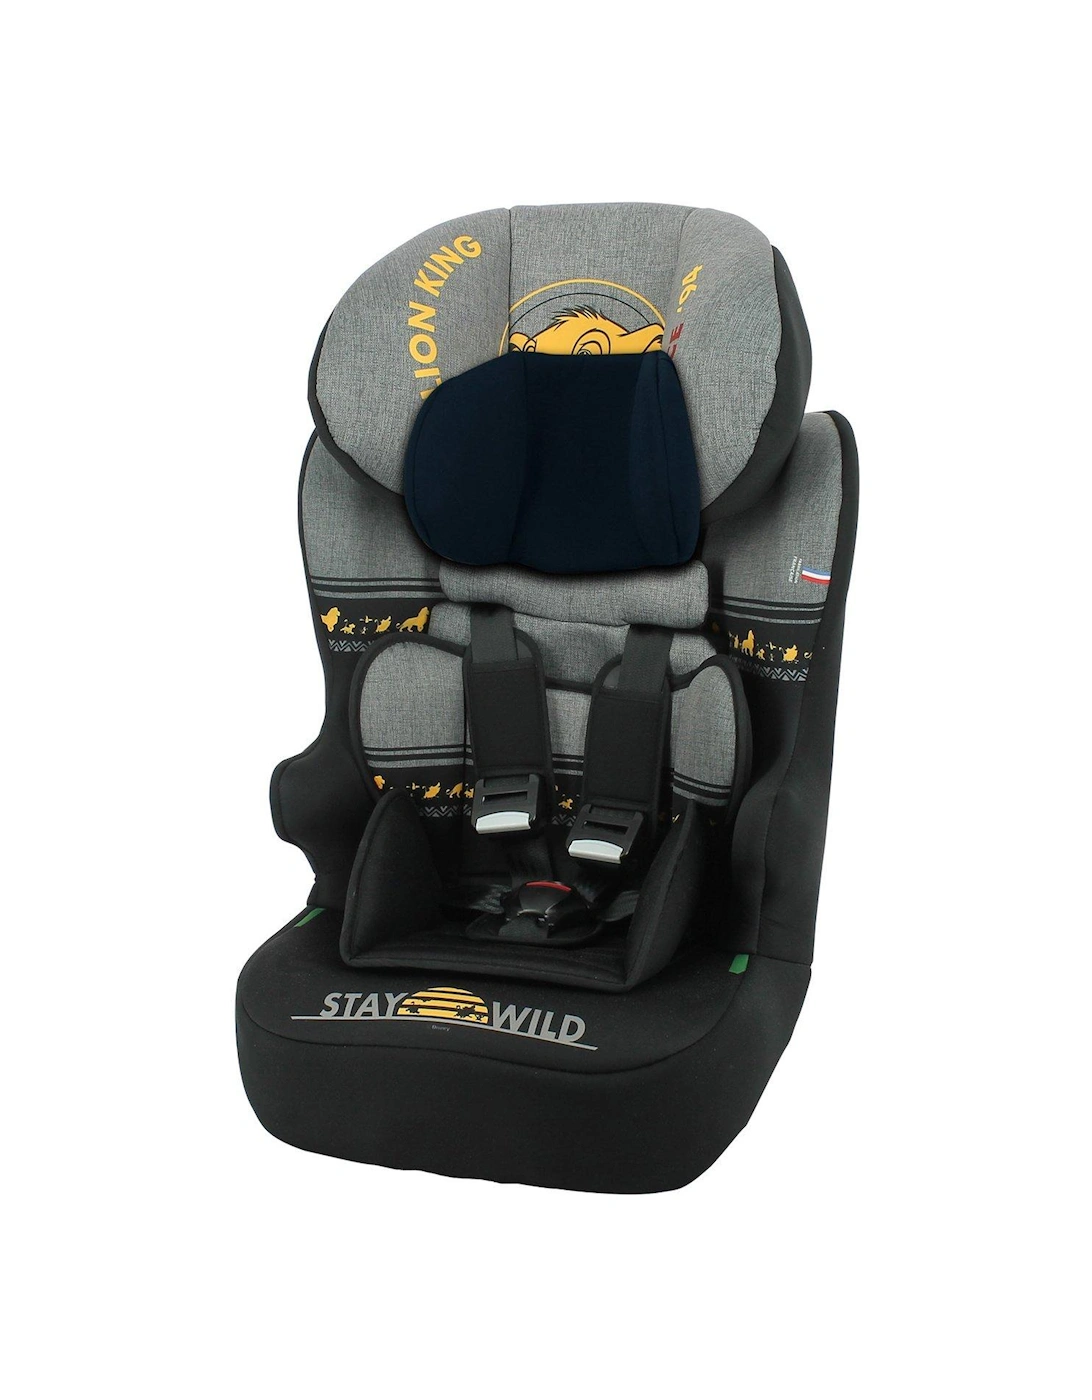 The Lion King Lion King Race I Belt fitted High Back Booster Car Seat - 76-140cm (approx. 9 months to 12 years), 2 of 1